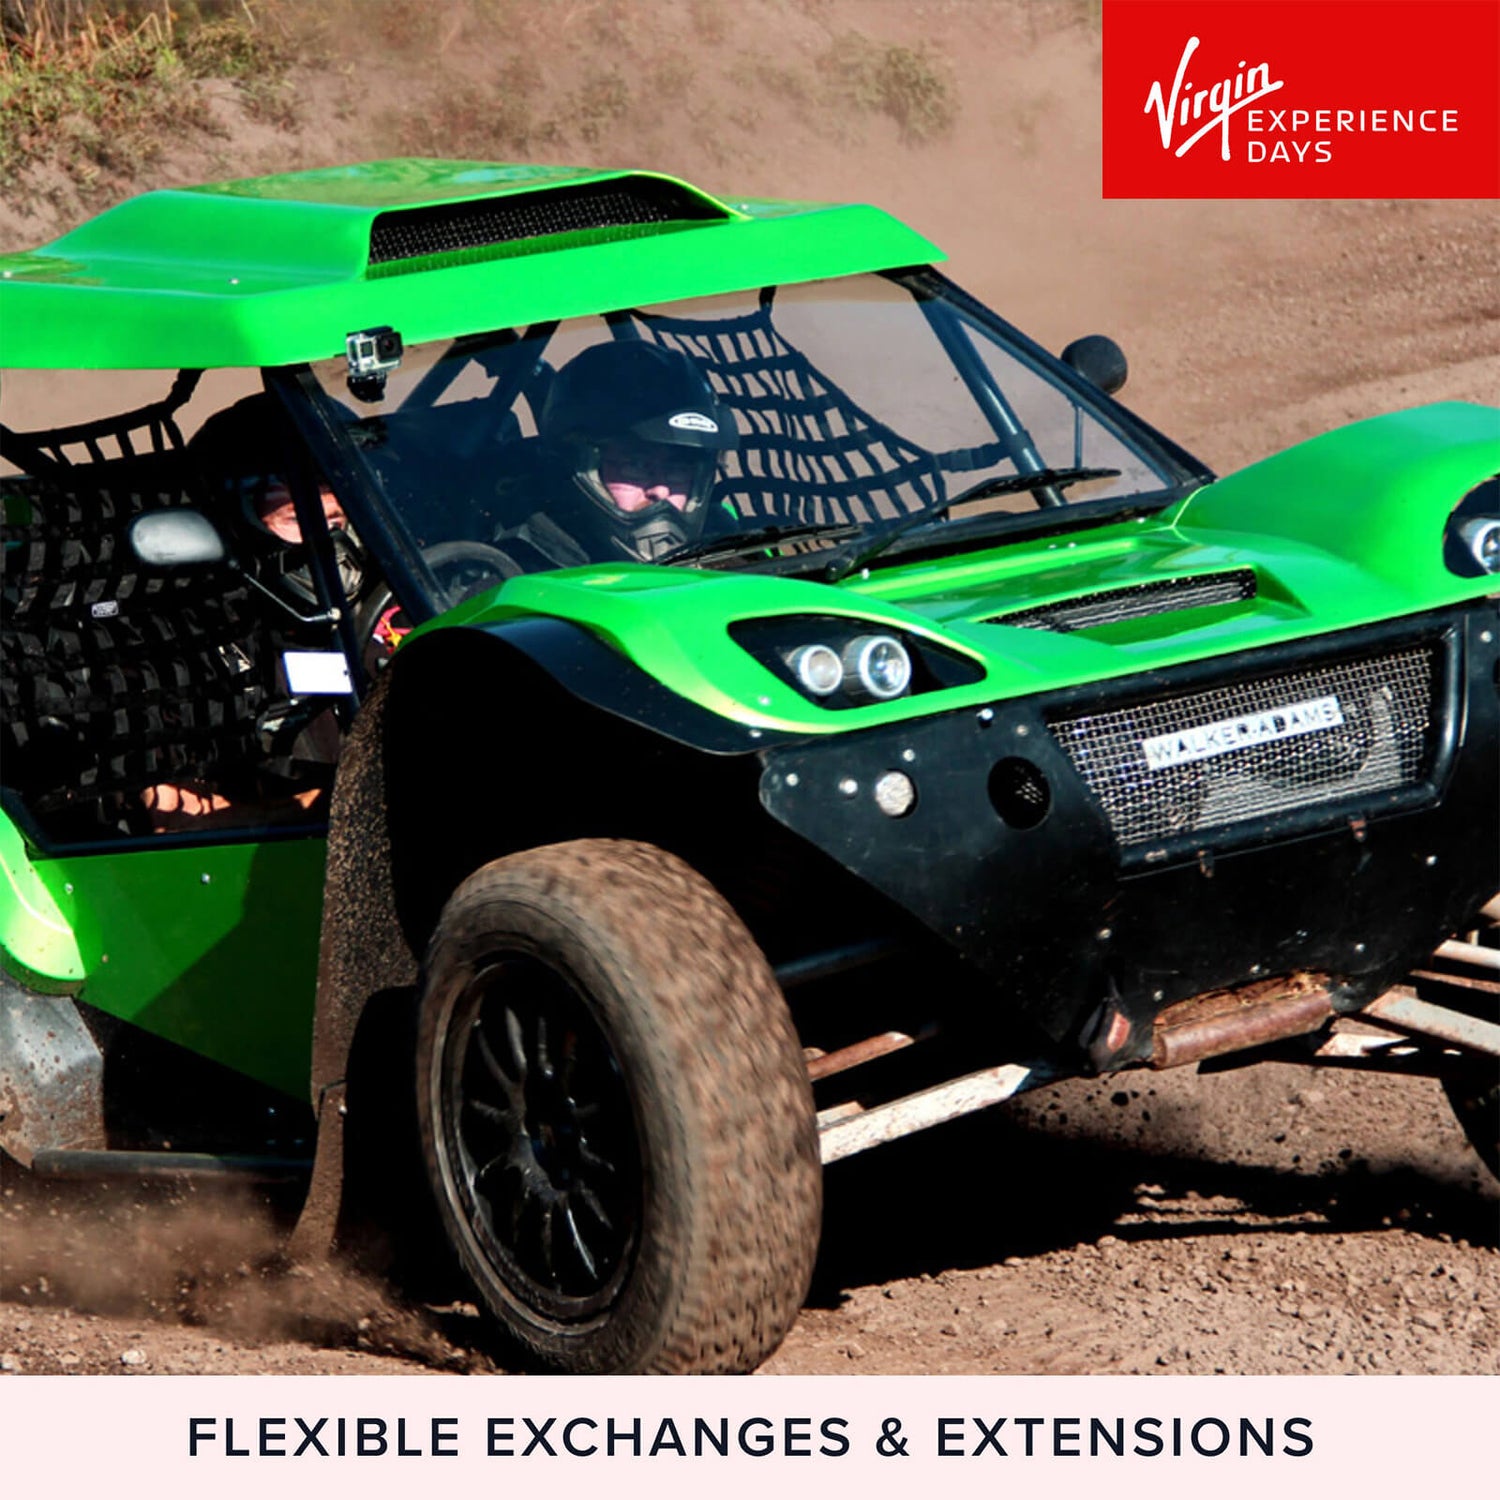 Introductory High Performance Off-Road Buggy Experience with Drive Revolution